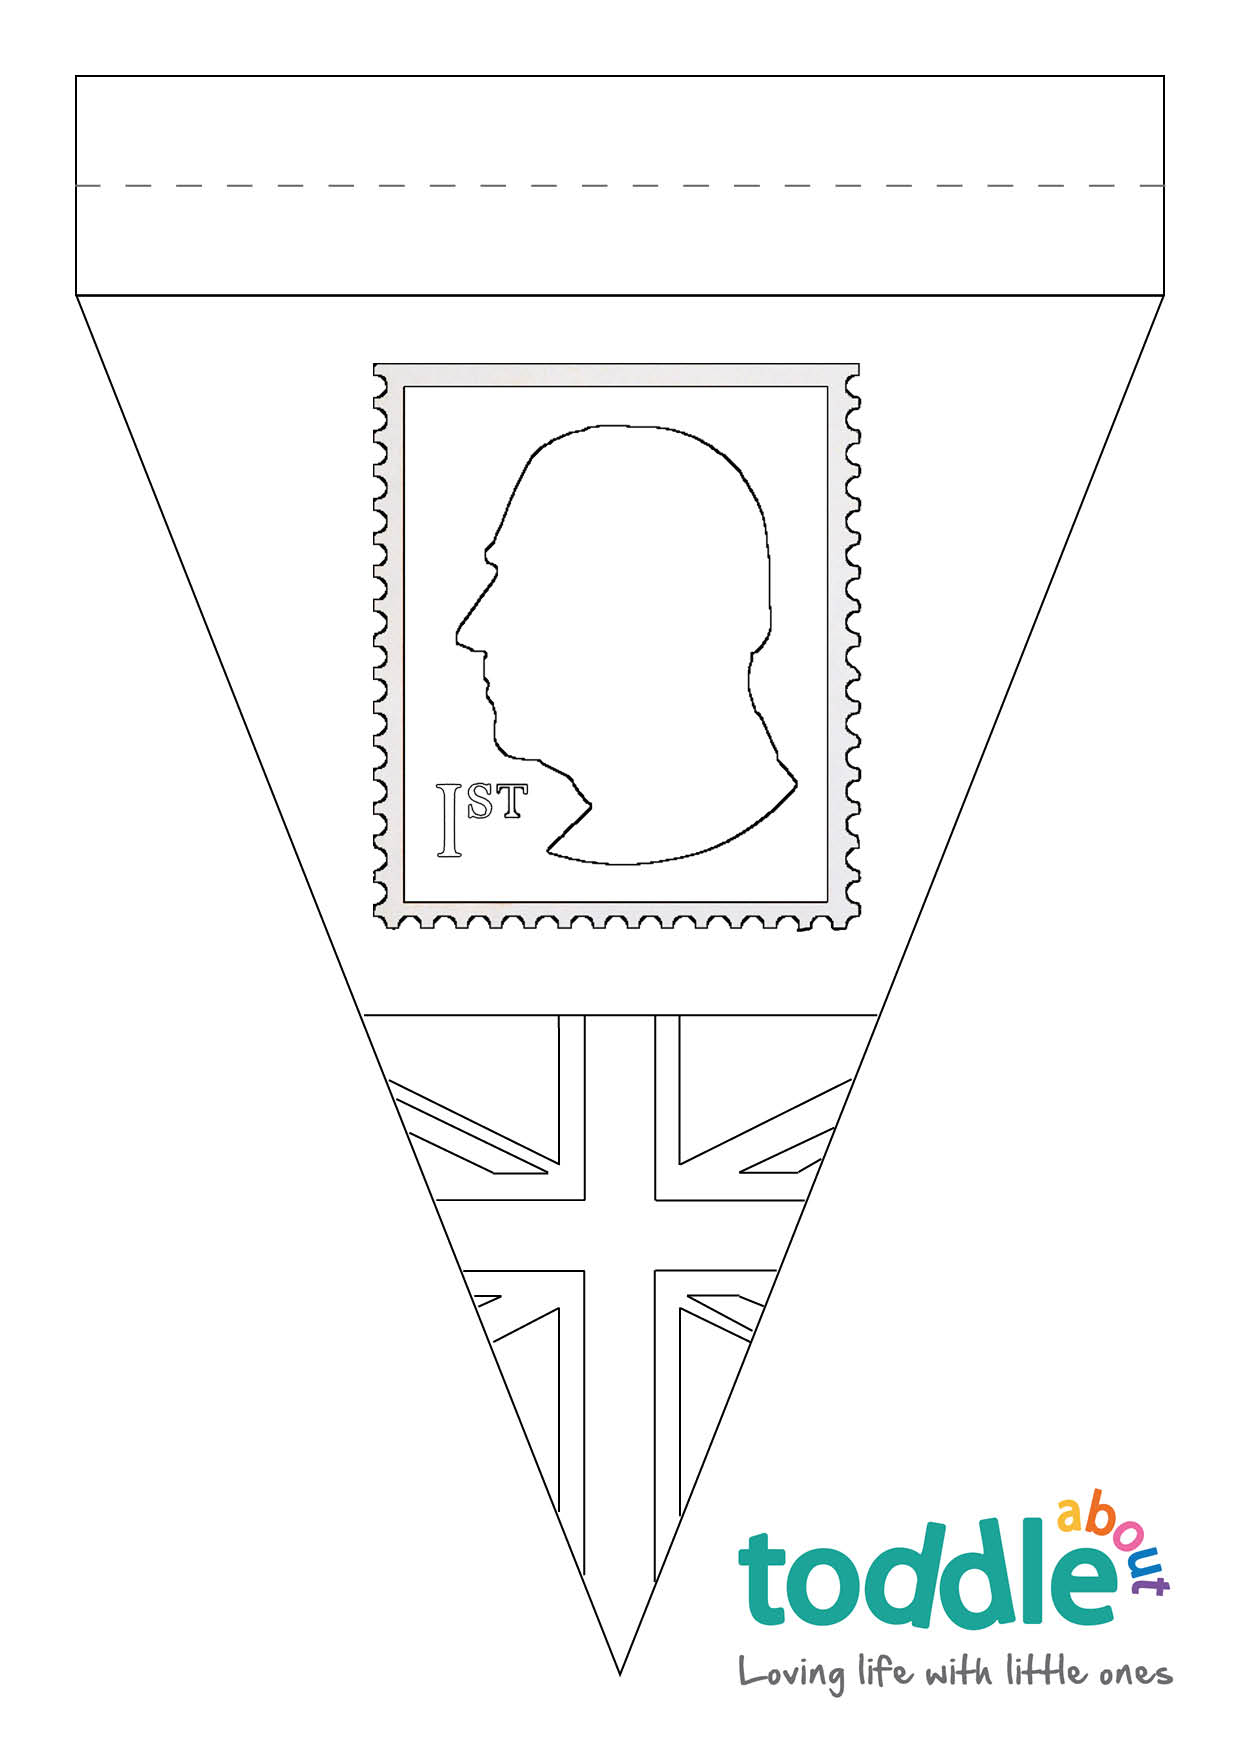 King Charles III Coronation Stamp Bunting Colouring In Sheet  image